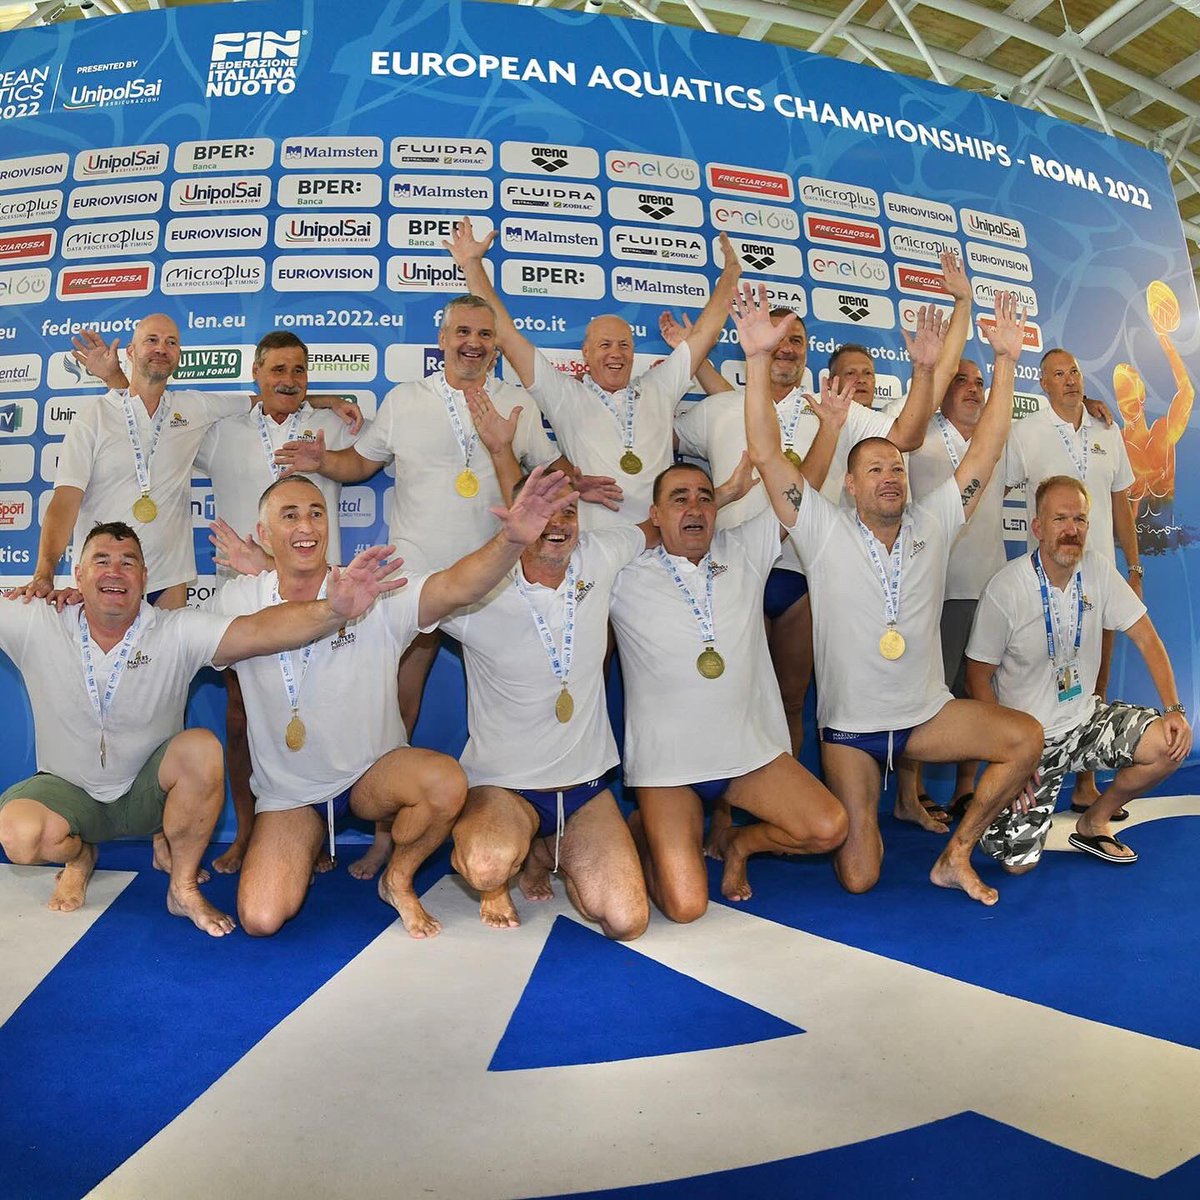 Throwback to past European Aquatics Masters Championships 2022! 🌟 Who's ready to make new memories in our #waterpolo events at #EAMasters2024? Sign up now ▶️ belgrade2024.org